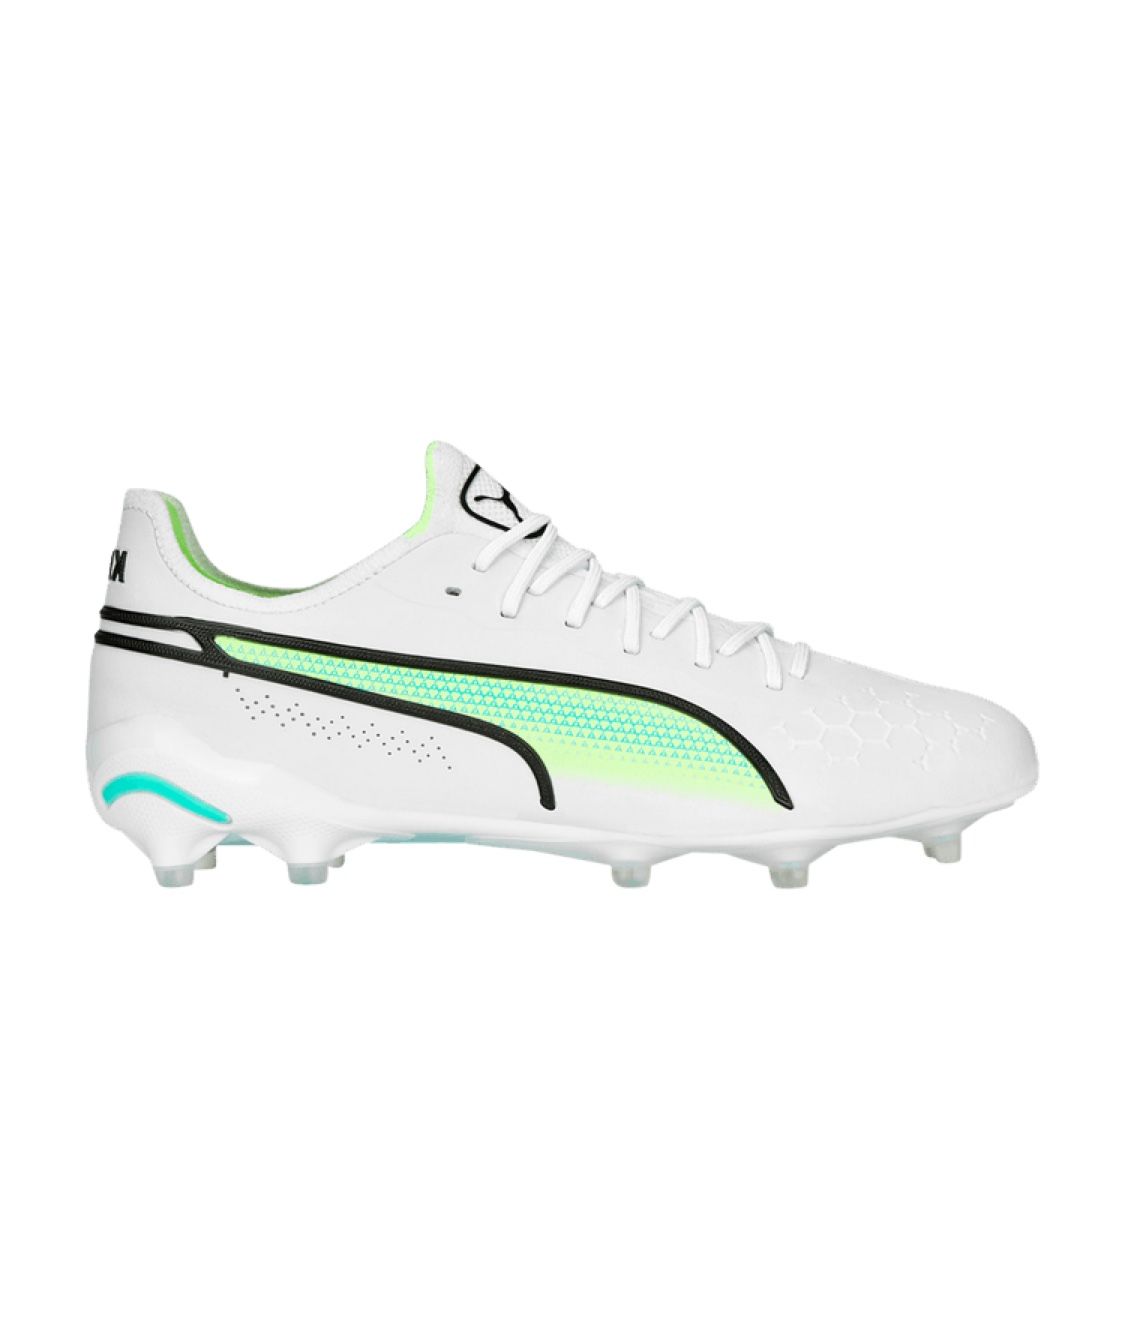 Puma King Ultimate FG AG Women’s Size 7 Soccer Cleats